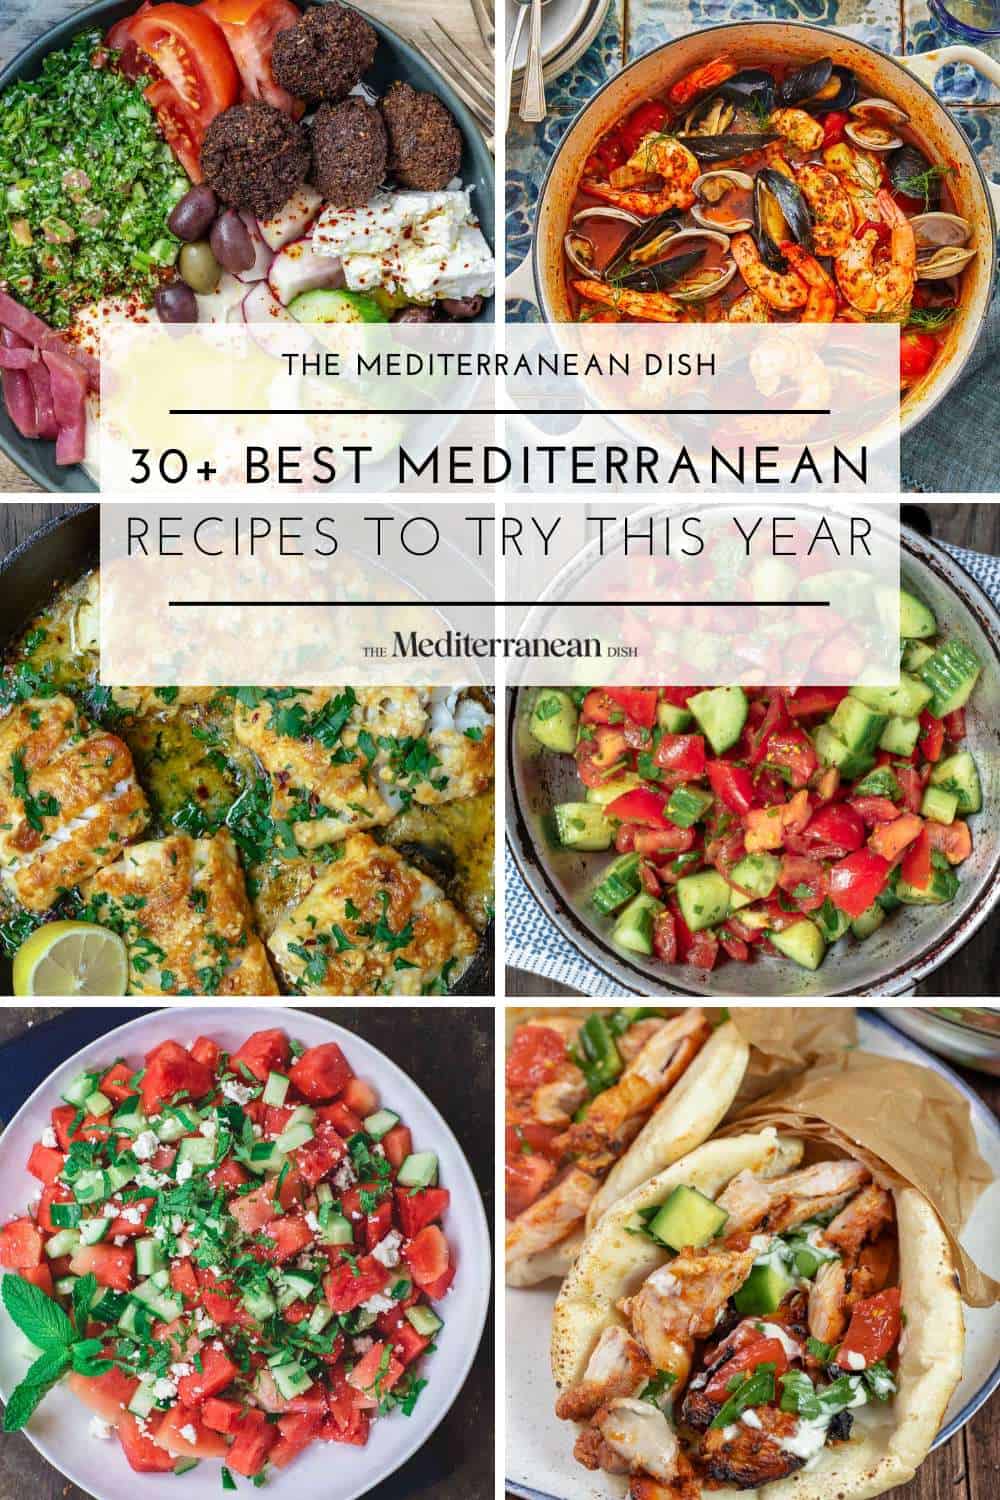 Mediterranean Diet and Healthy Sauces and Dressings